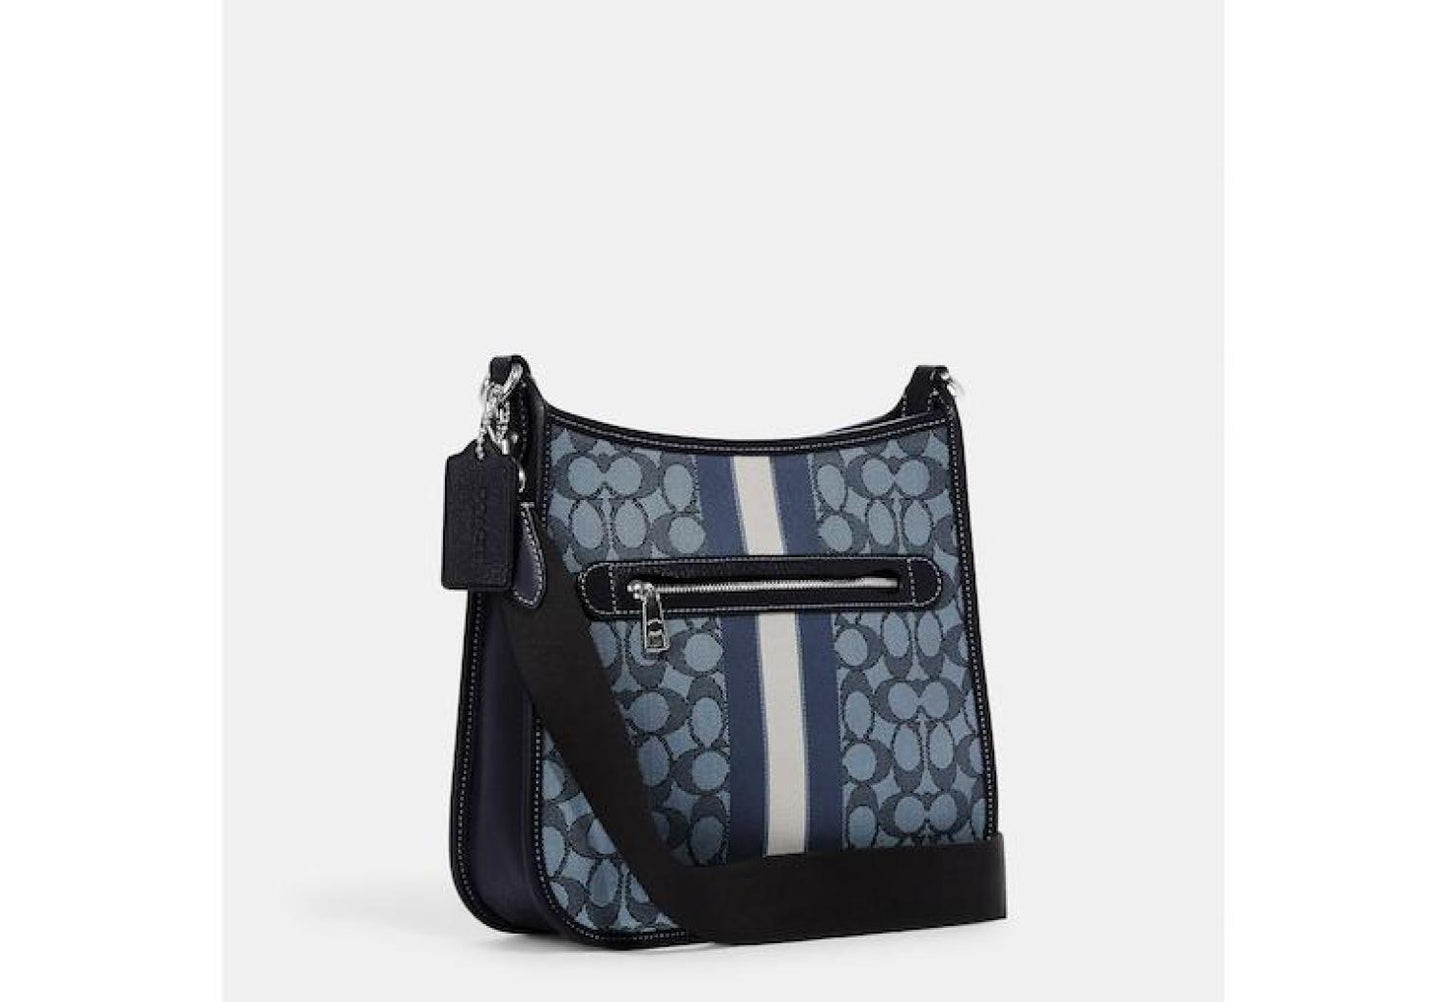 Coach Outlet Dempsey File Bag In Signature Jacquard With Stripe And Coach Patch